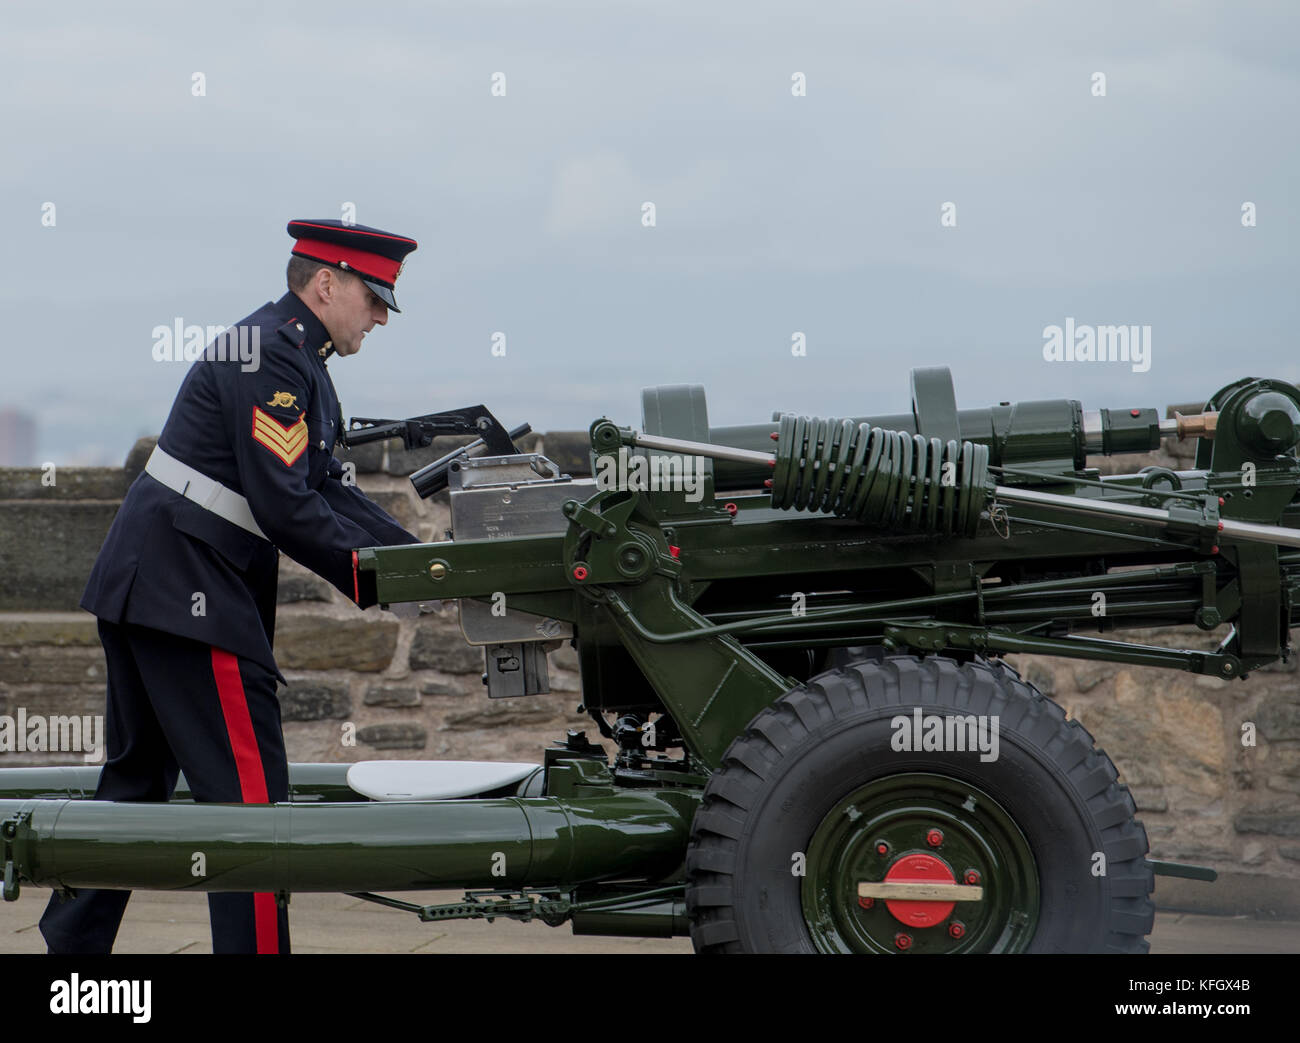 Edinburgh Castle, Edinburgh, Scotland: a Sargent prepares to fire the “one o’clock Gun”.  This gun is fired at one o’clock in the afternoon every day  Stock Photo